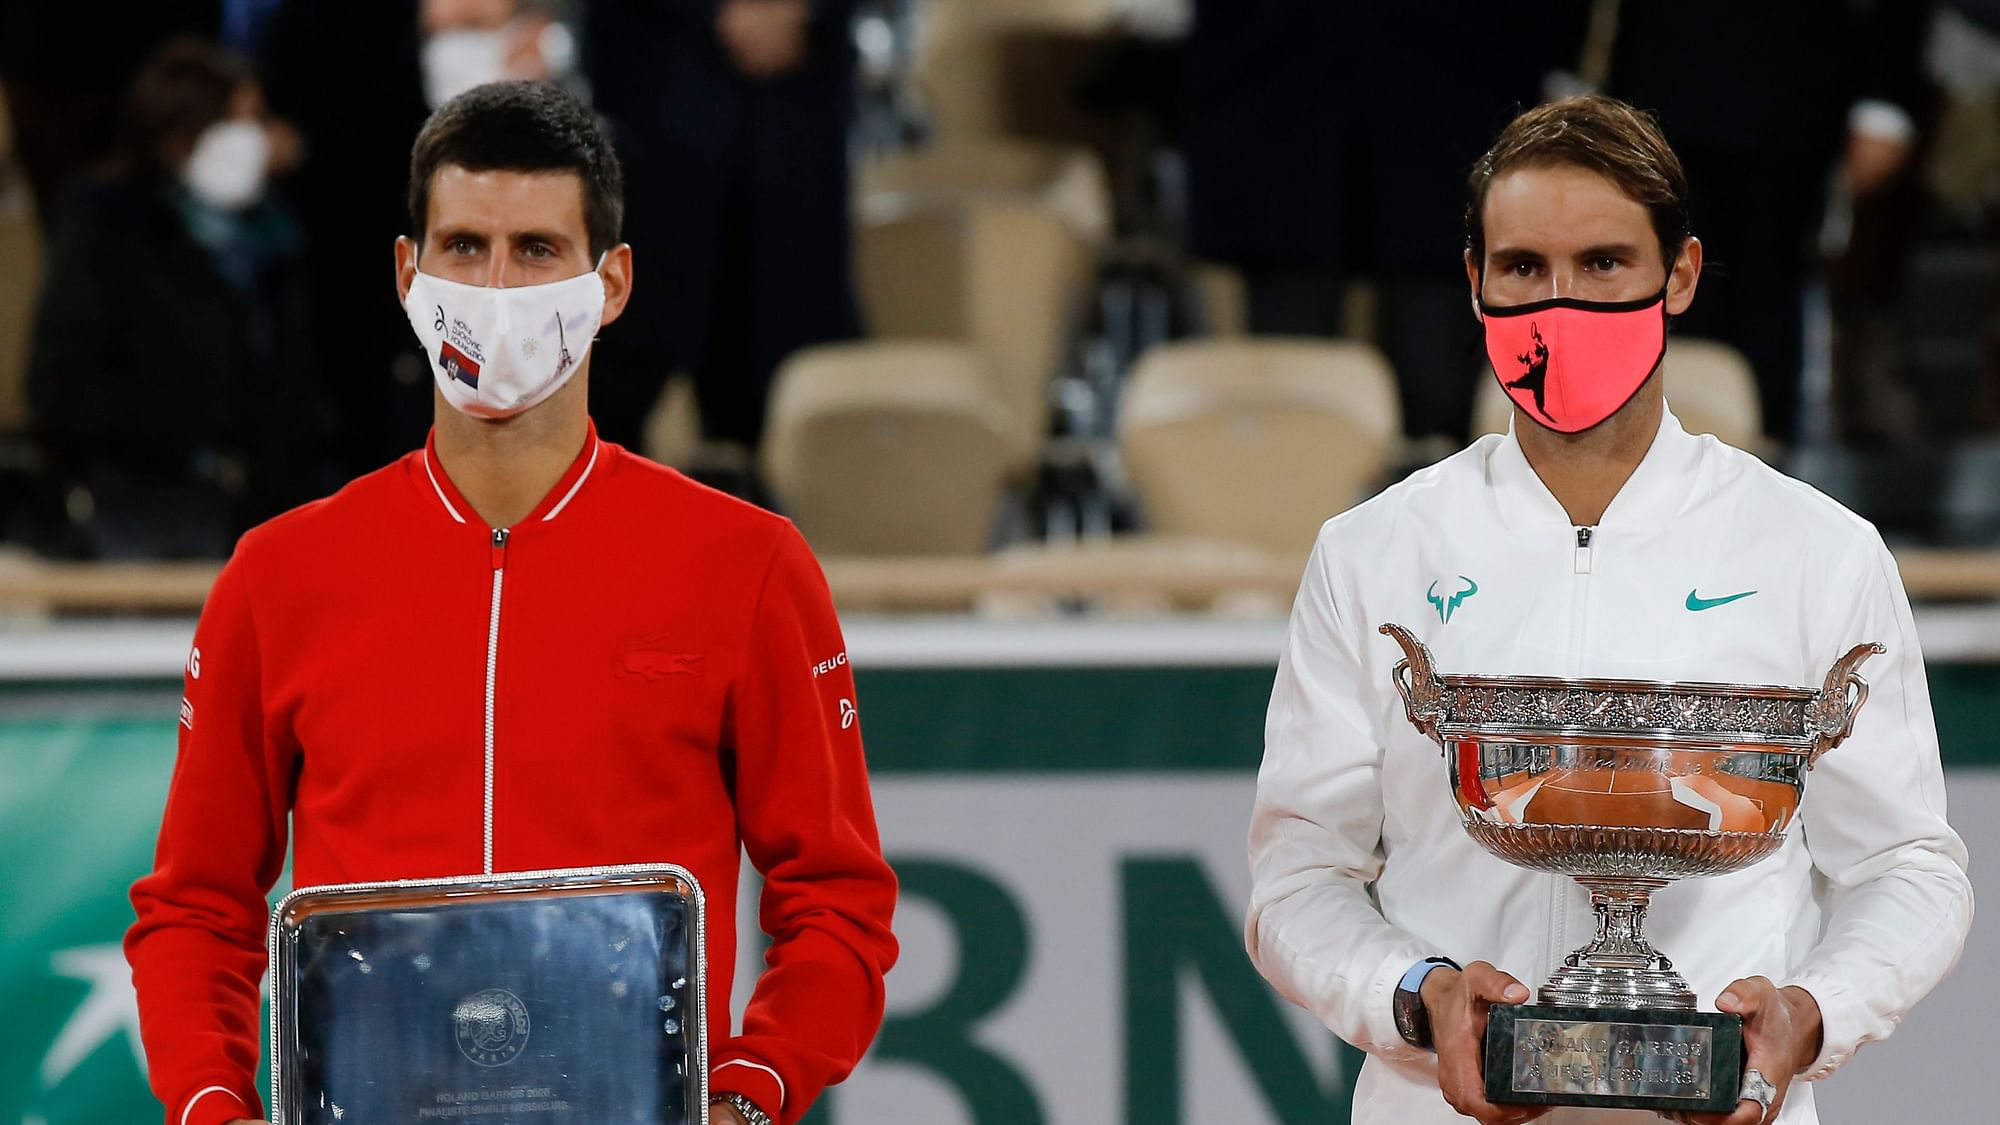 Chris Evert has called out Djokovic for saying his rivalry with Nadal was the greatest in the history of the sport.